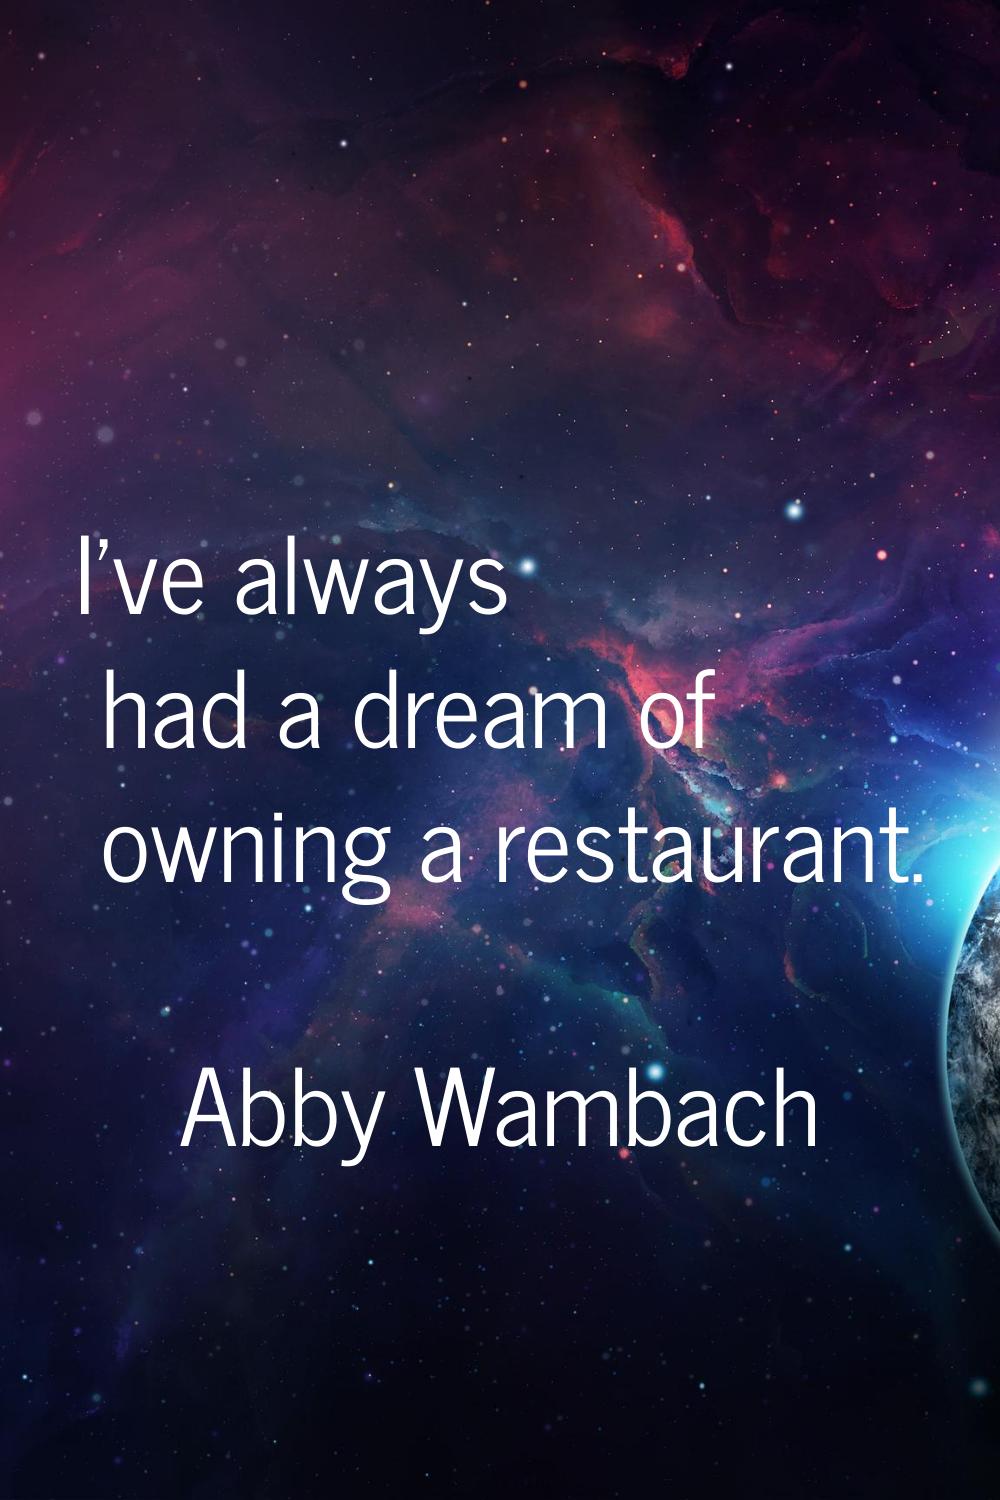 I've always had a dream of owning a restaurant.